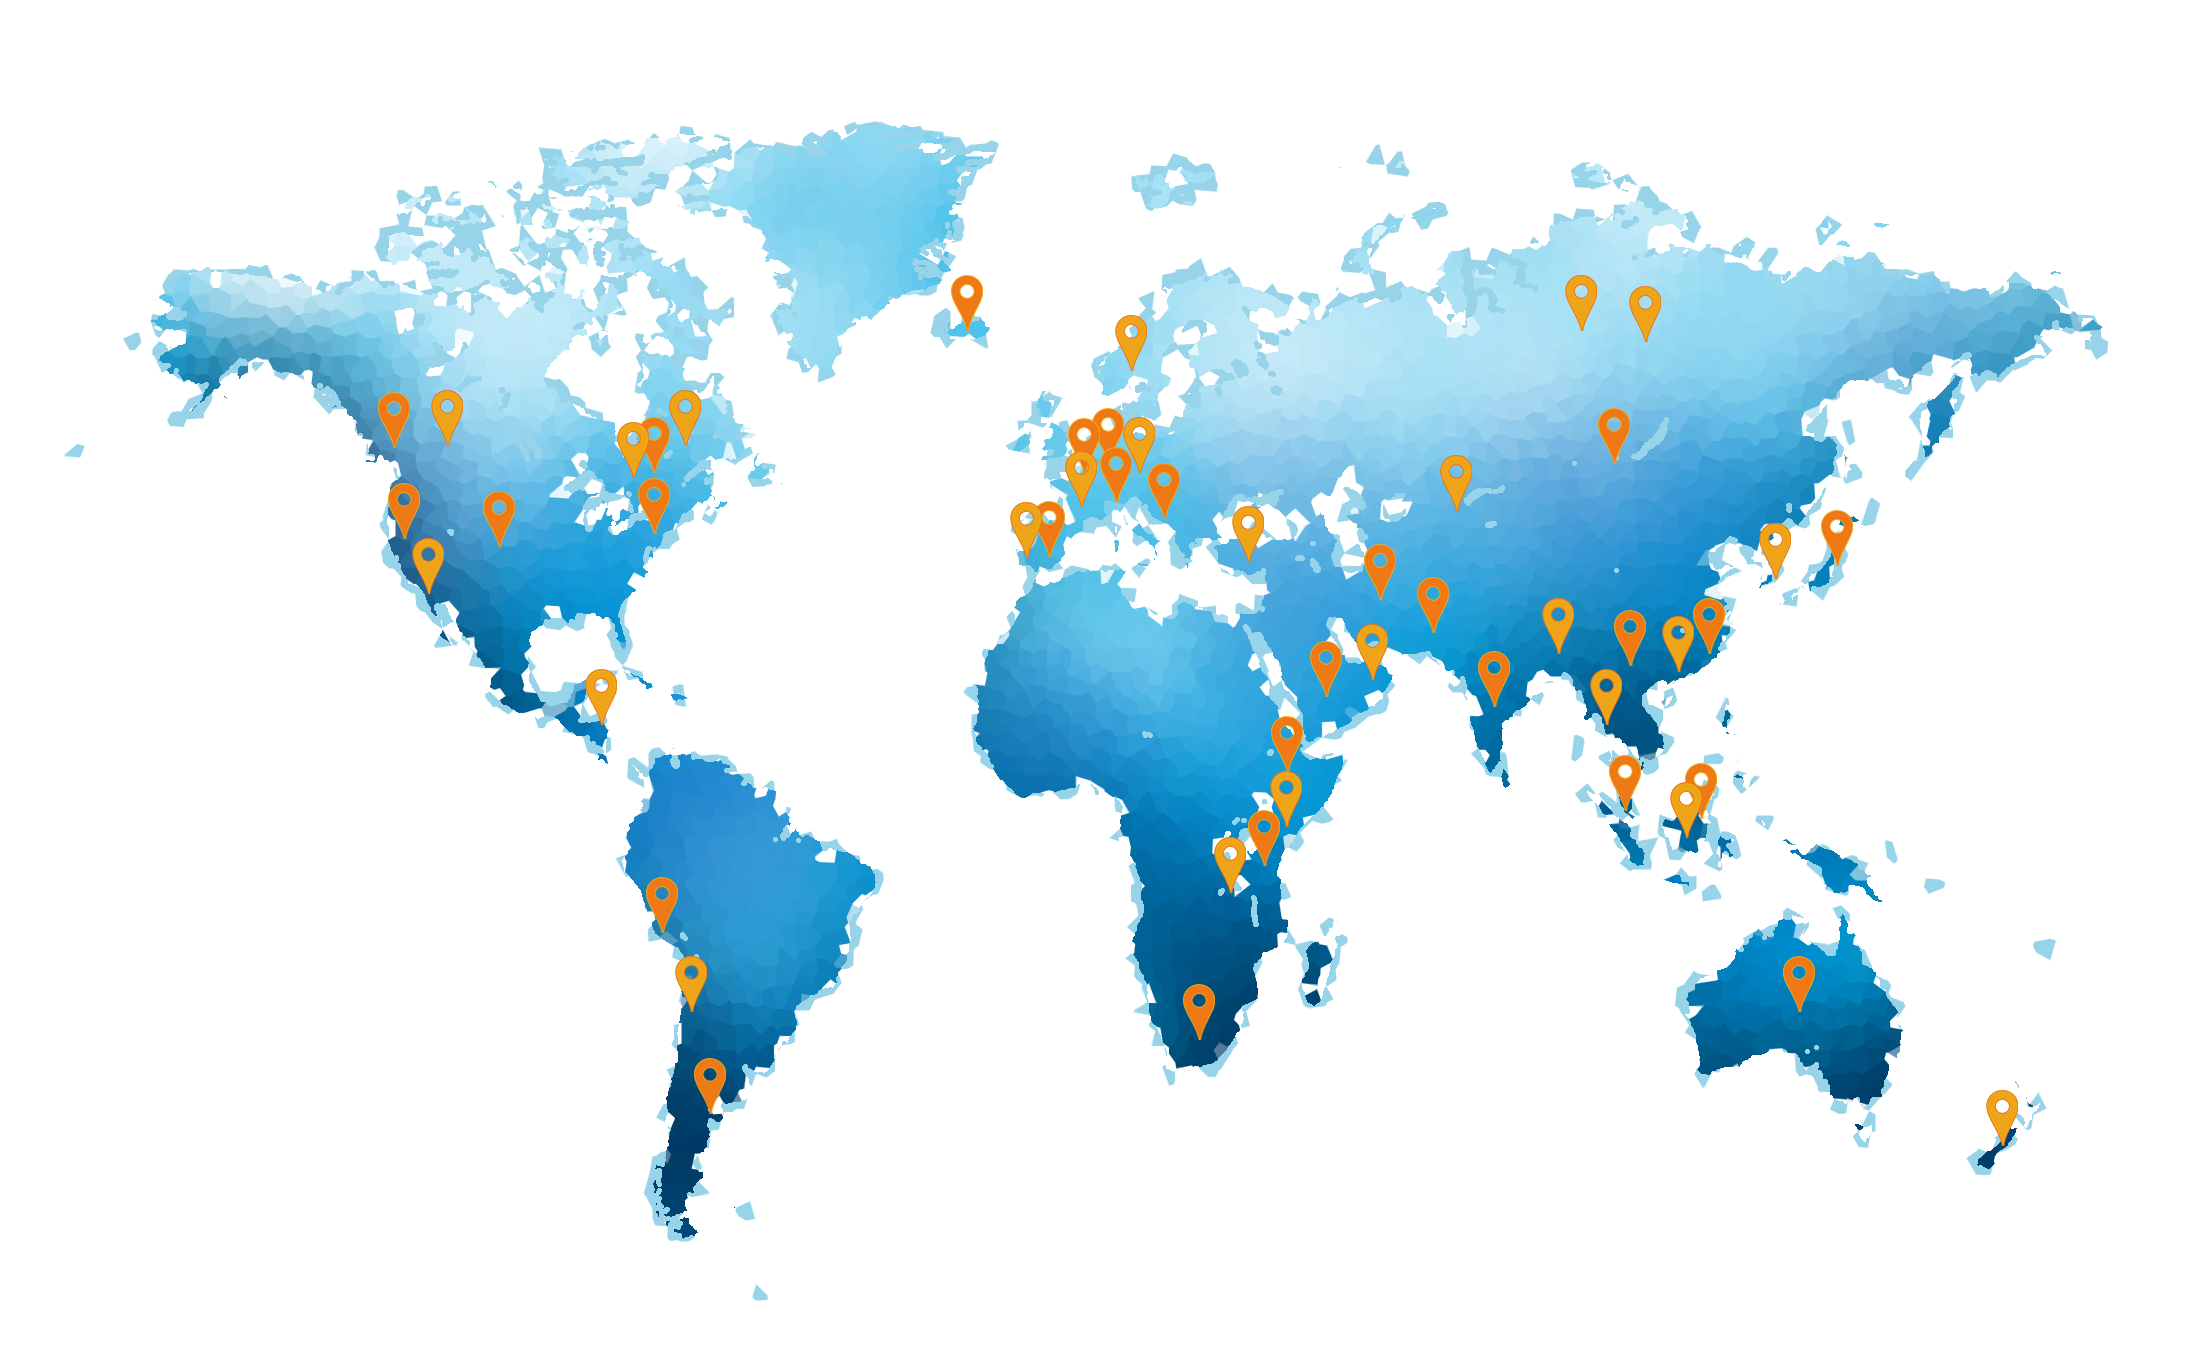 World map with orange pins indicating where students have worked